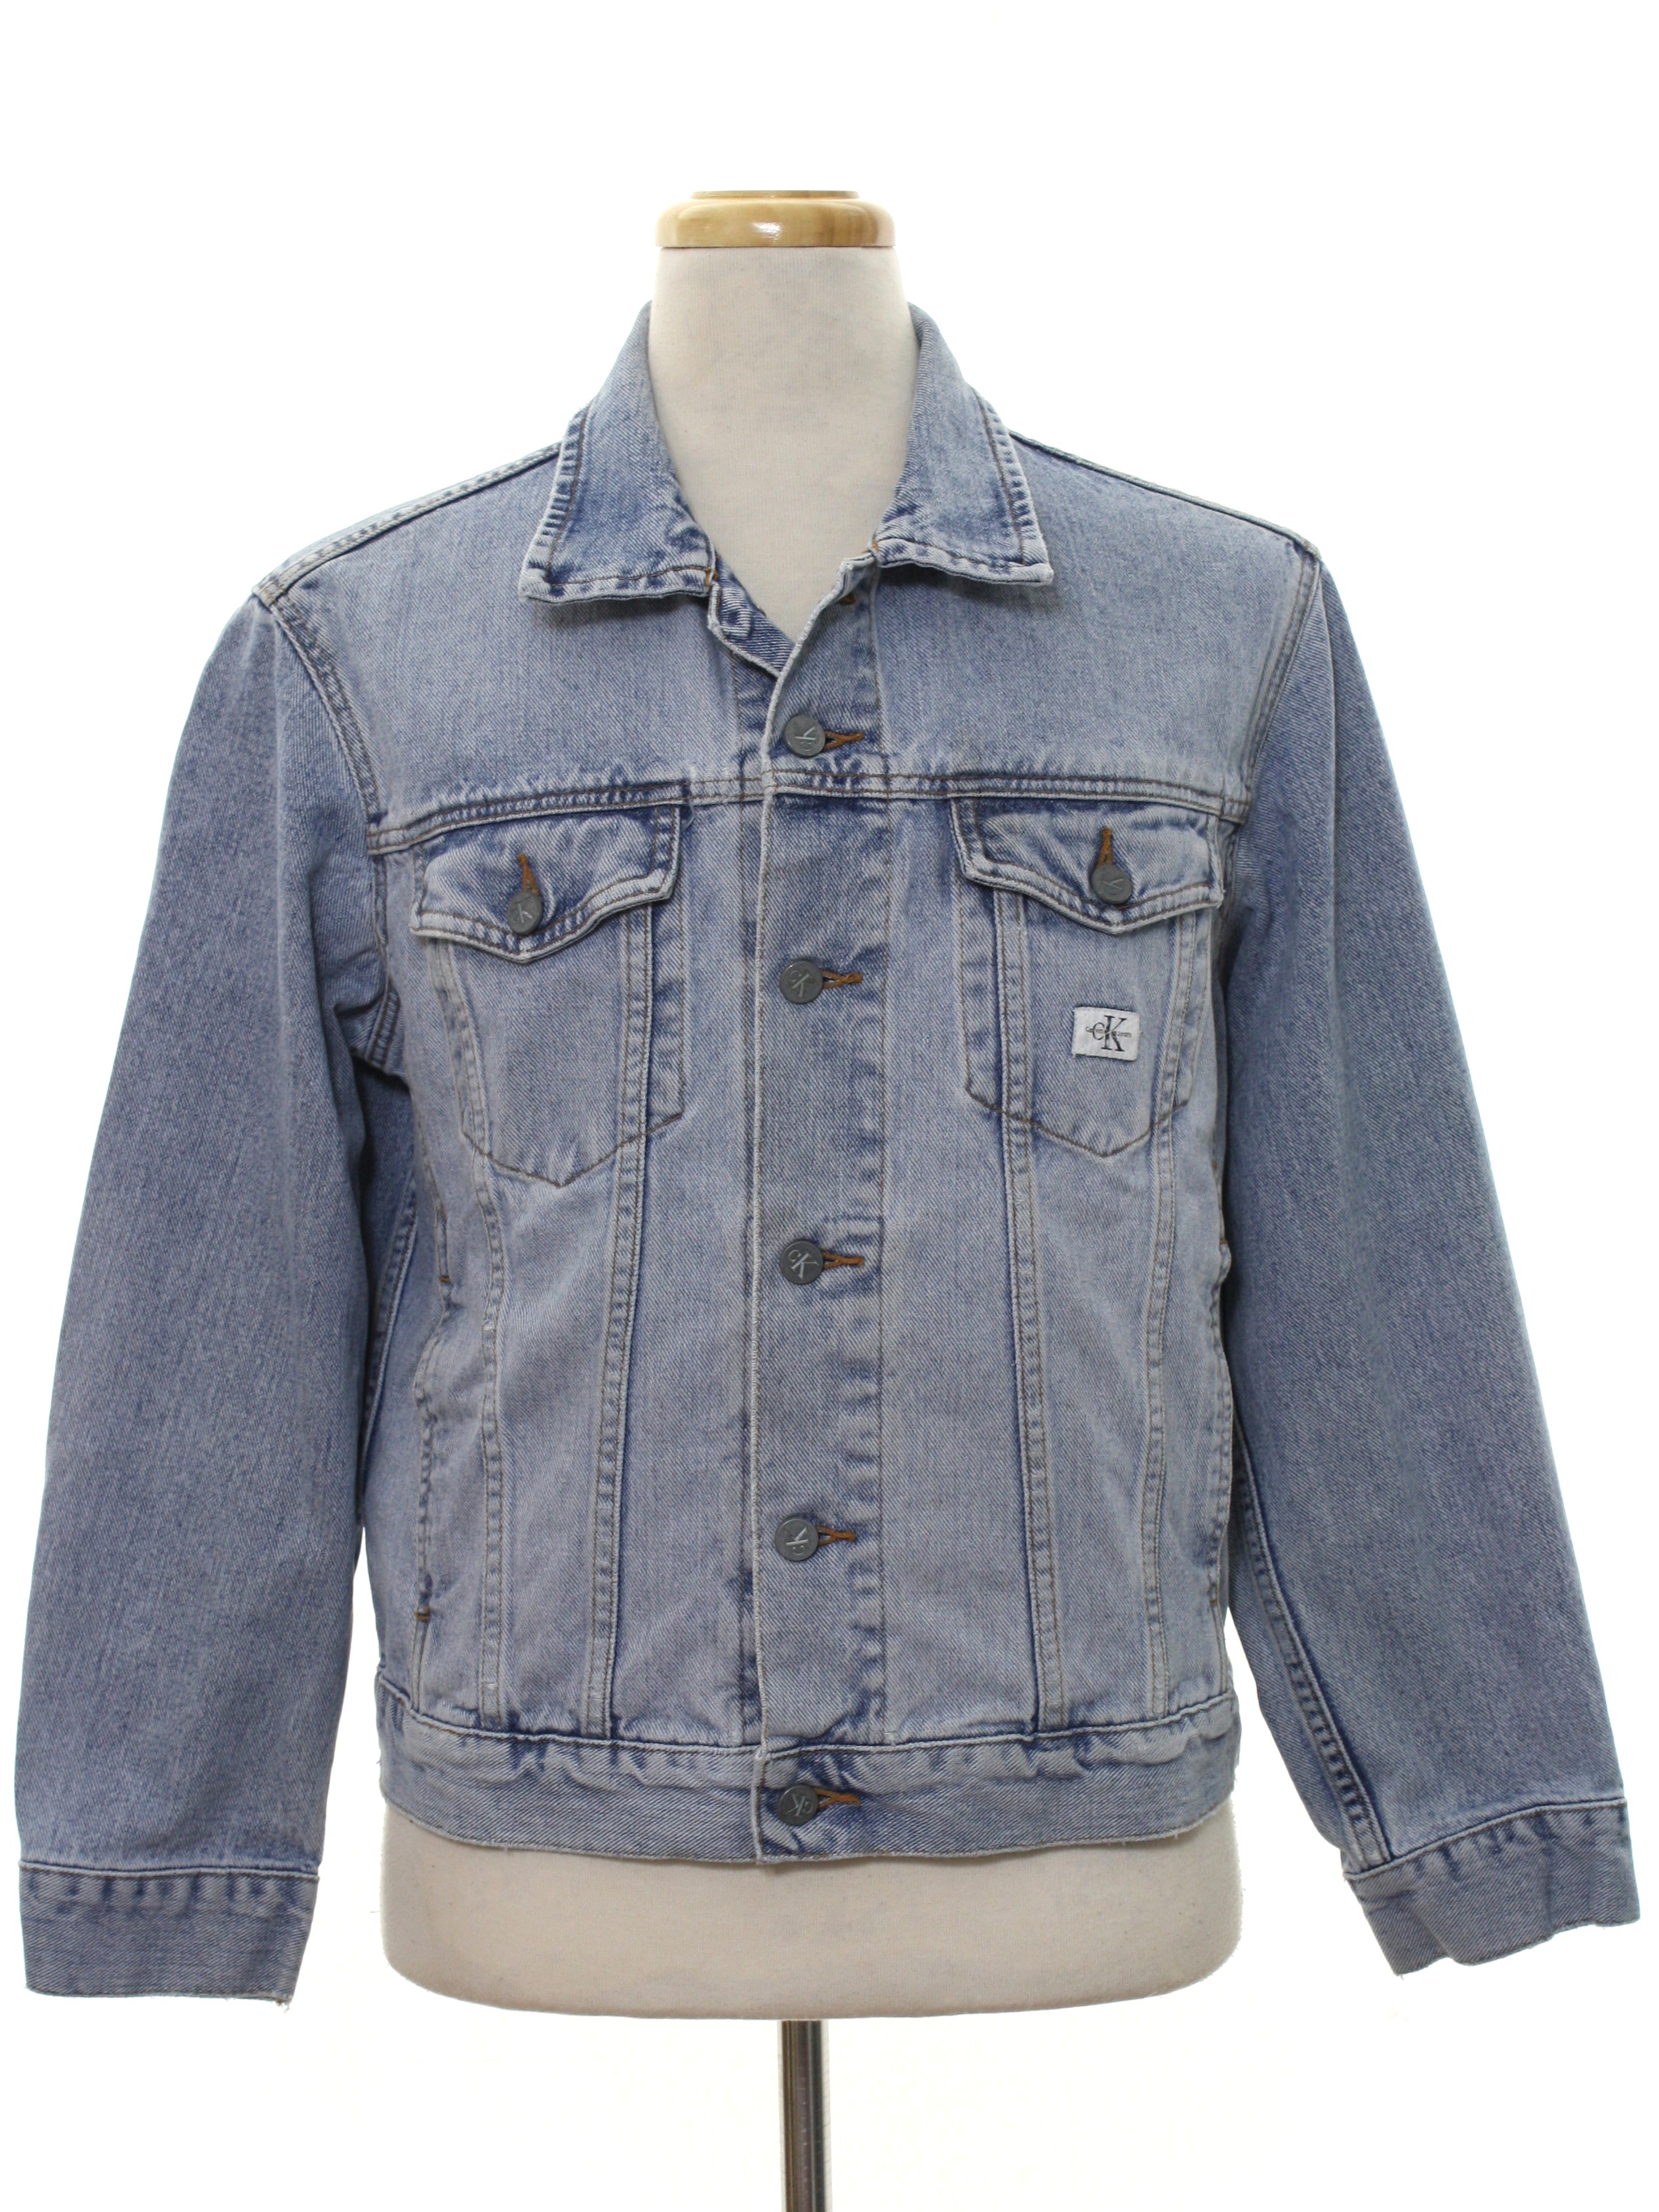 1980's Jacket (CK Calvin Klein Jeans): Late 80s or Early 90s -CK Calvin ...